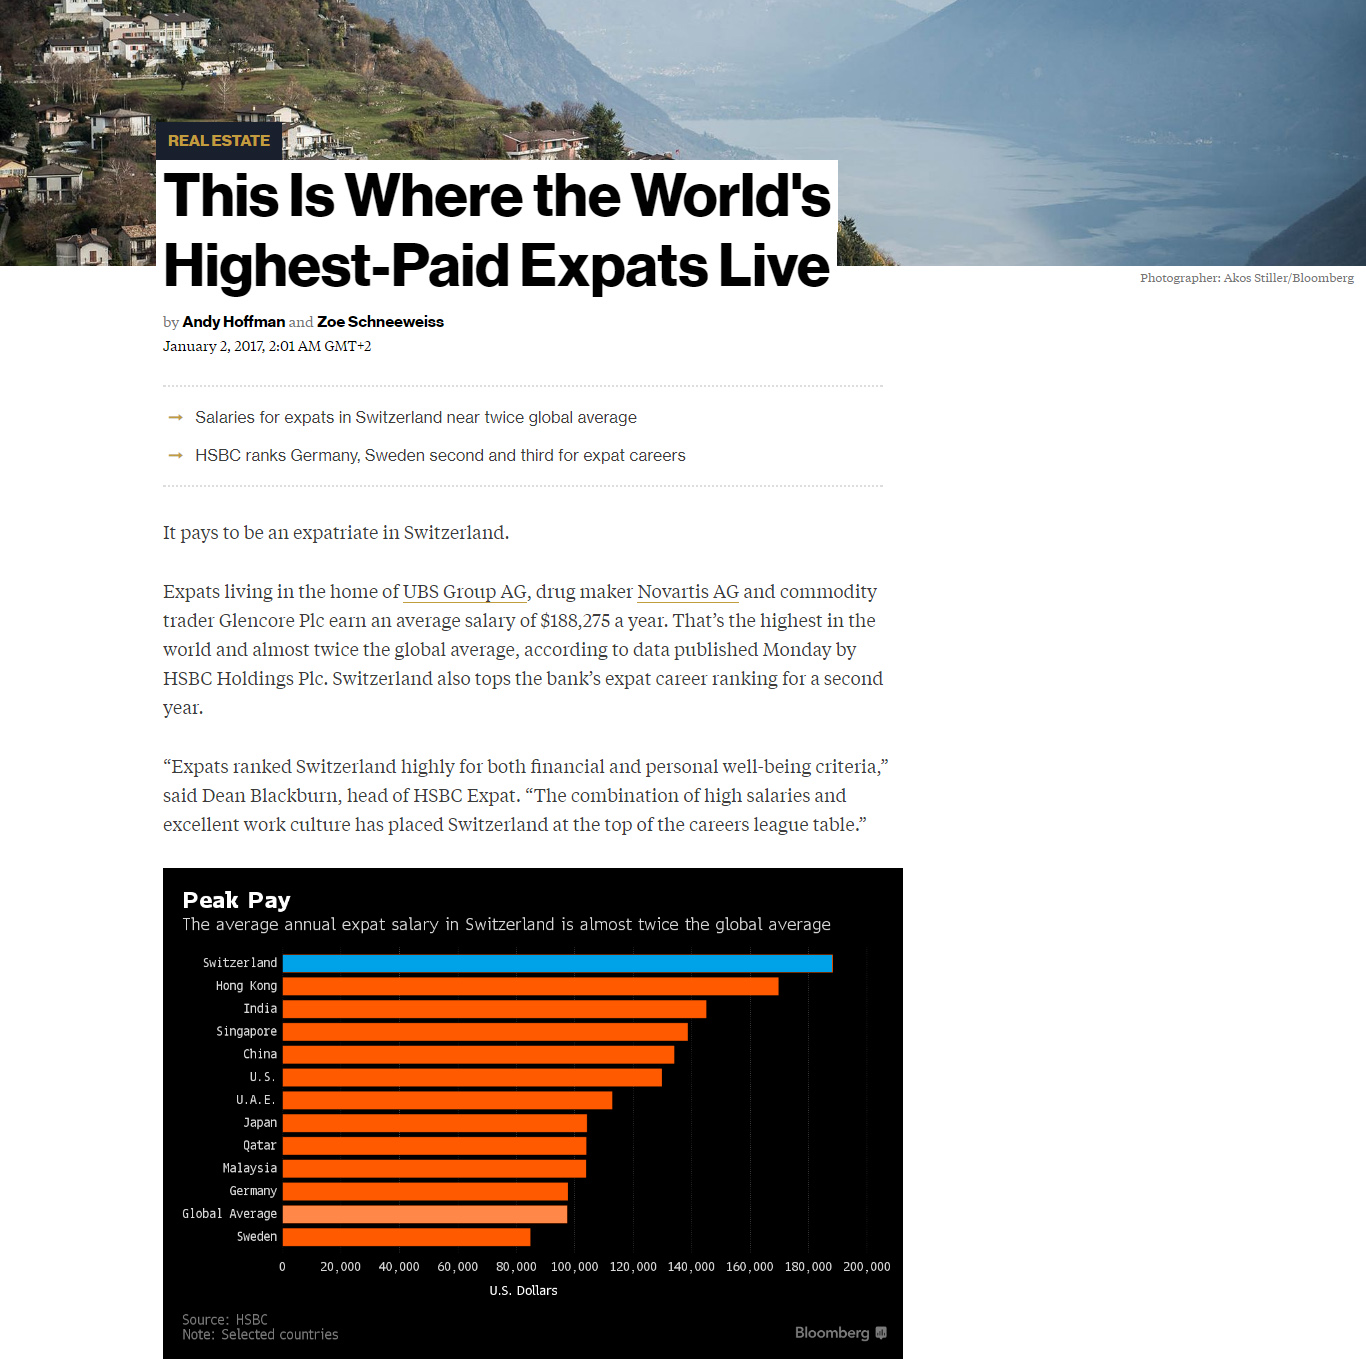 Pdf: This is where the world's highest-paid expats live - Stonehard